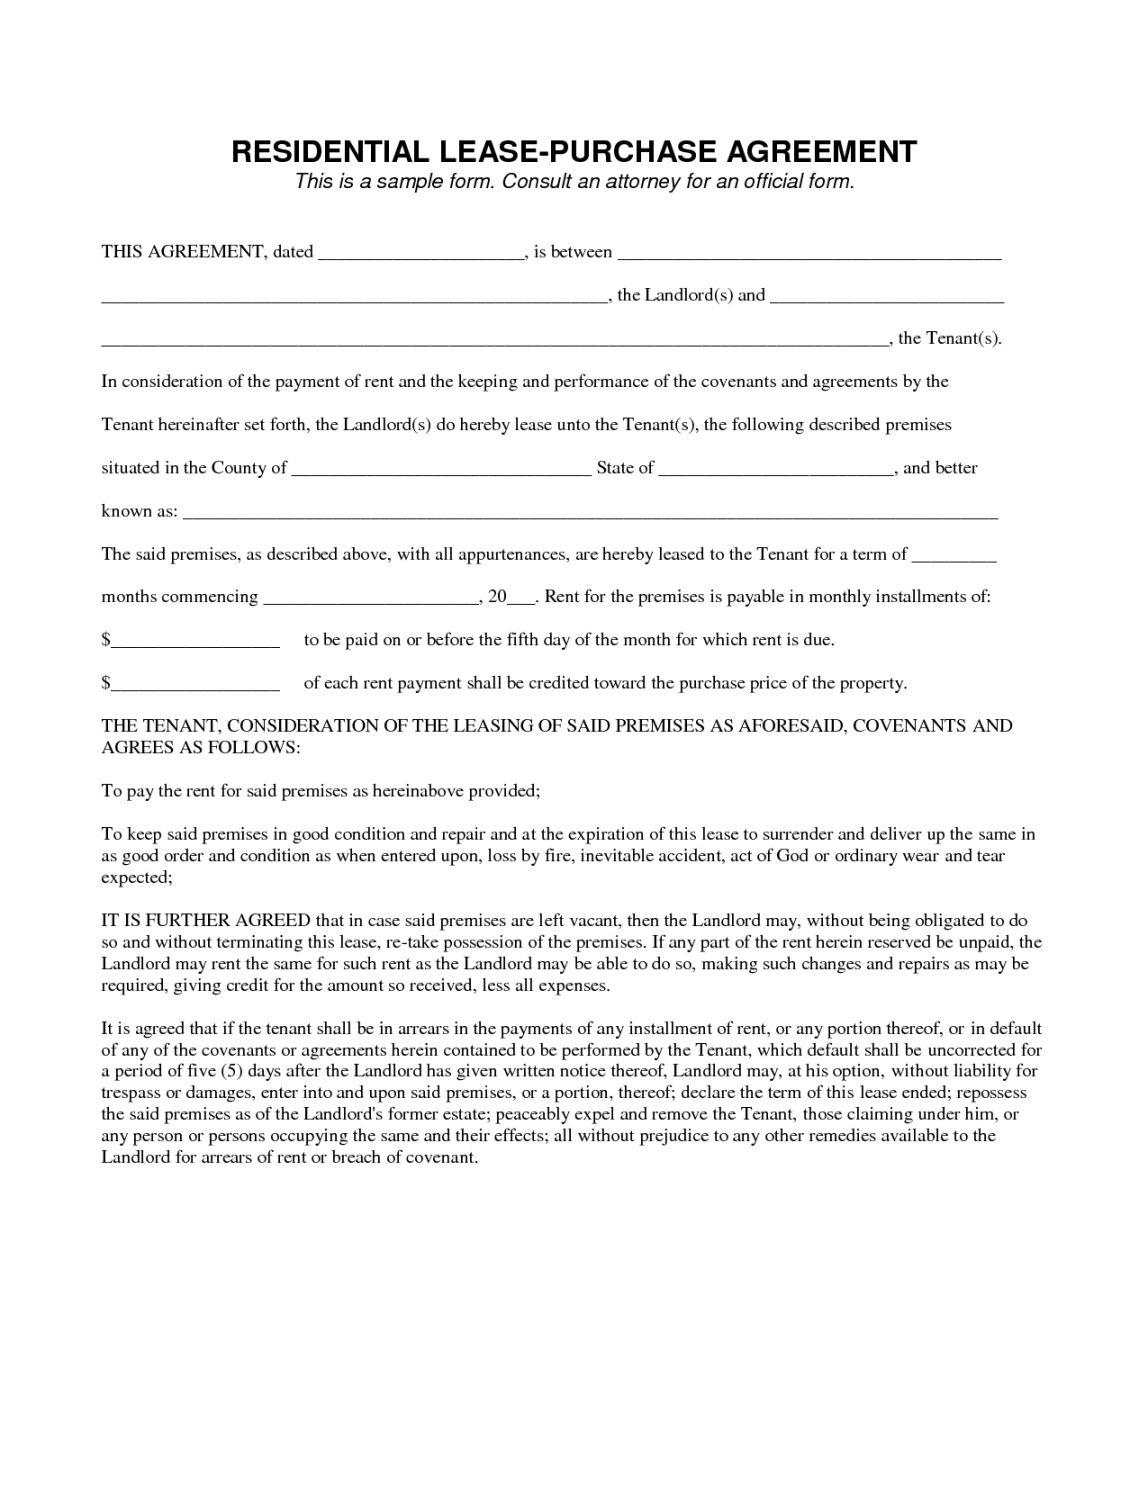 Contract Rental Agreement Template Editable Lease To Own Contract Template Legal Agreement Contract